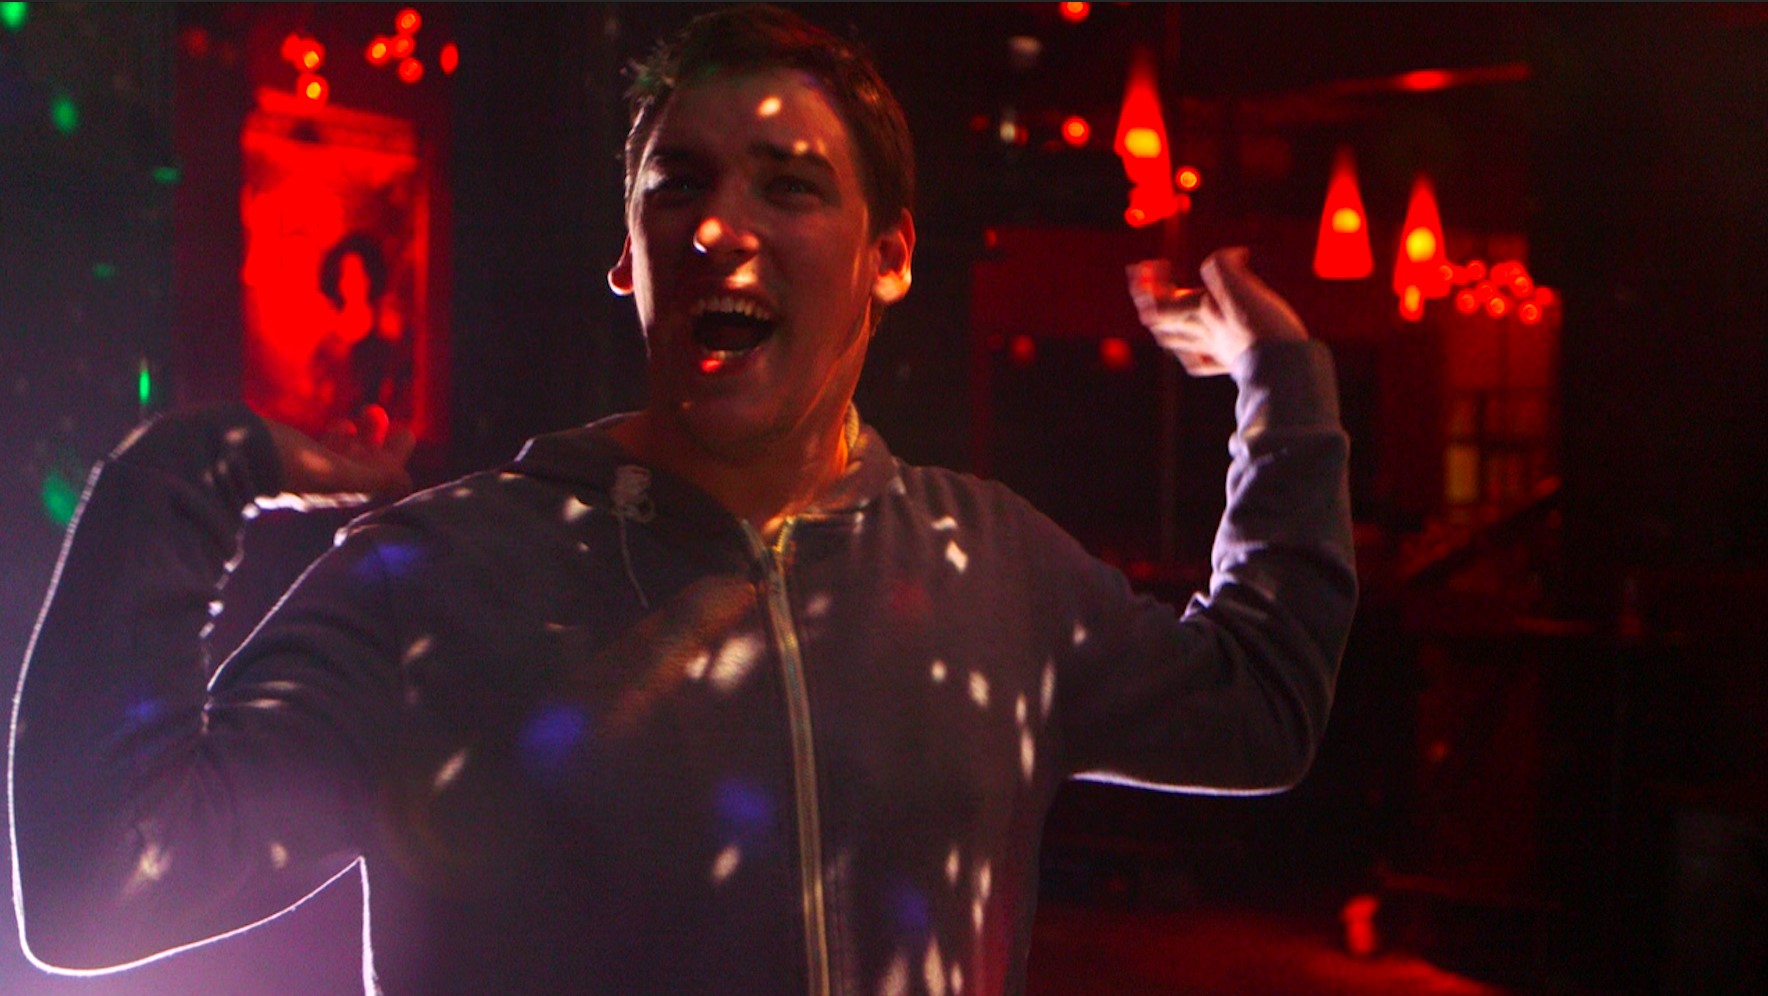 A still from the film: Thomas dancing in a club